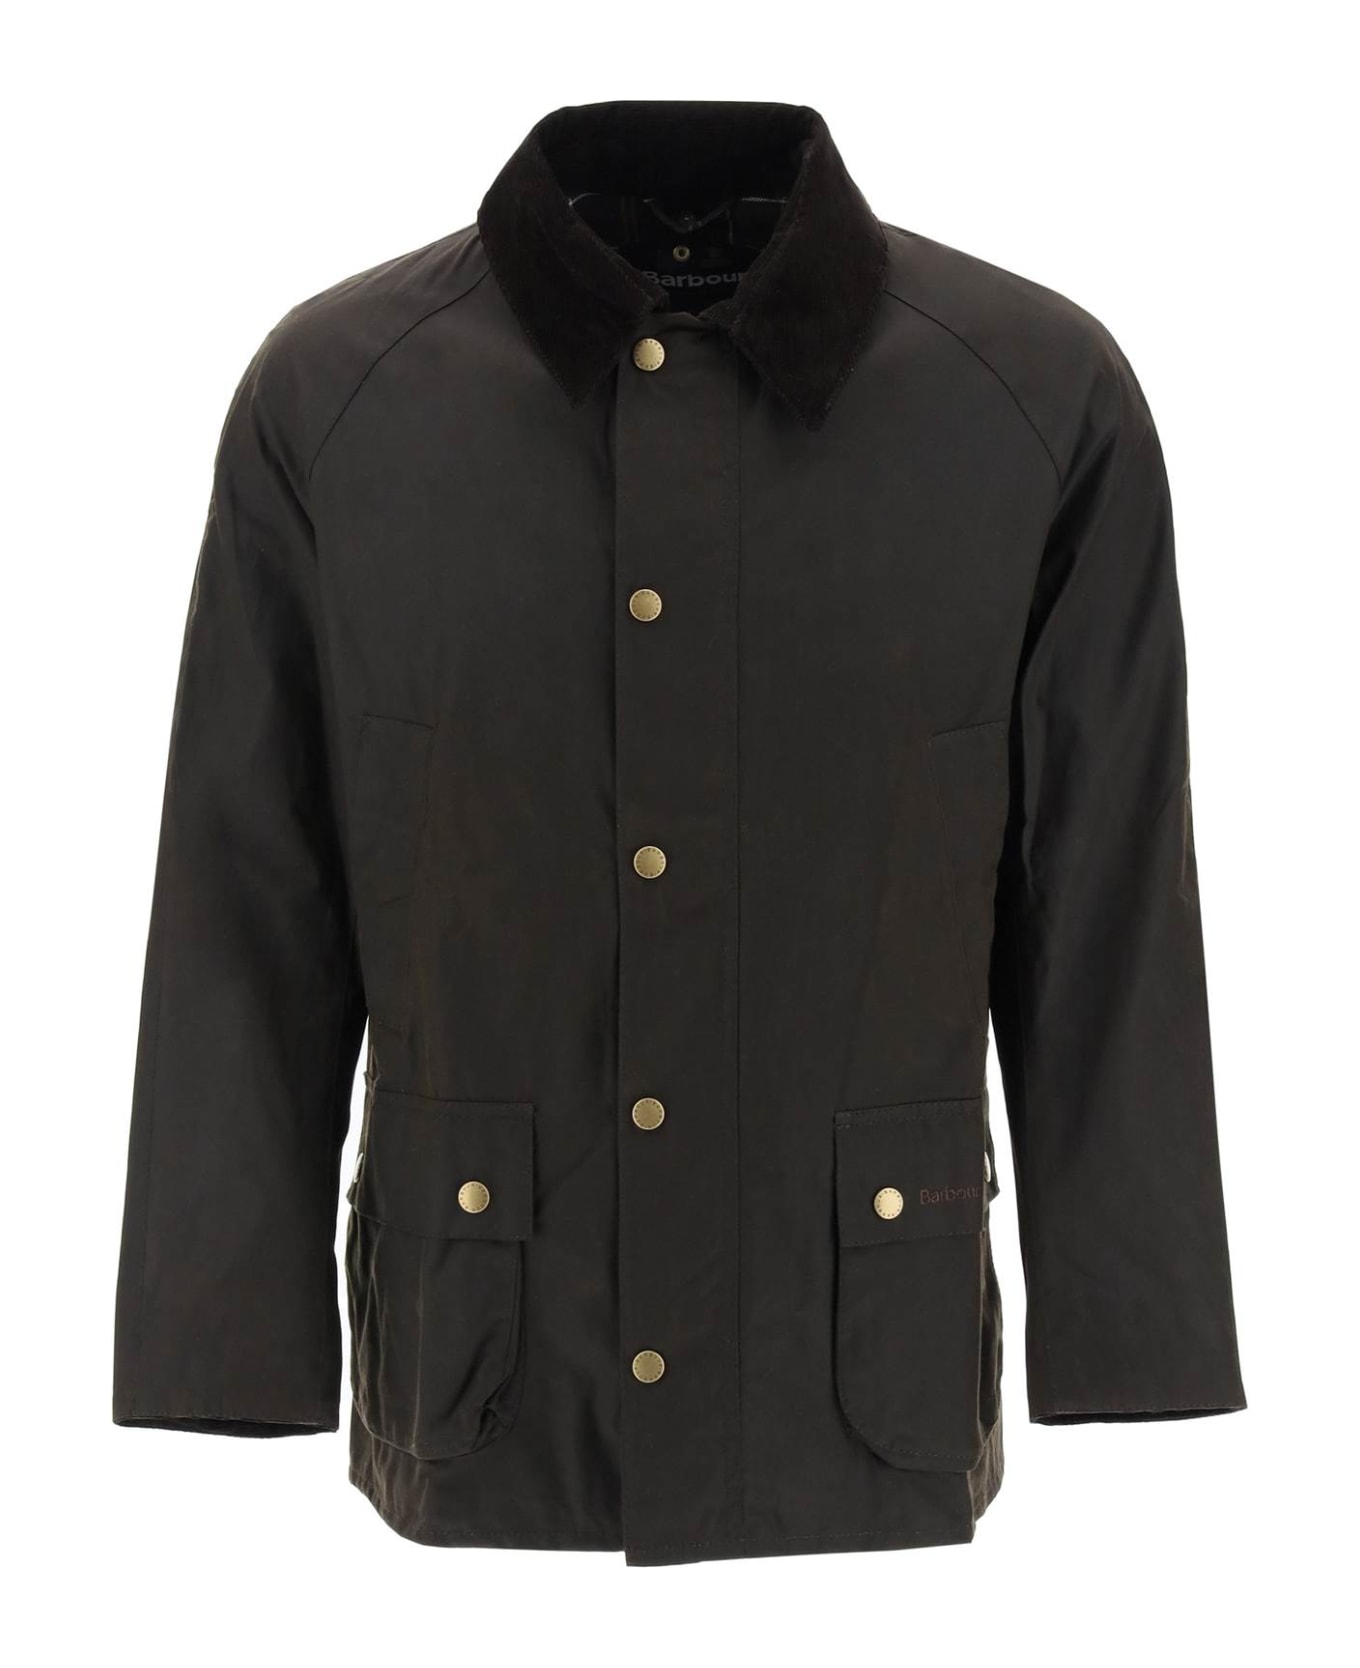 Barbour Ashby Waxed Jacket - OLIVE (Green) ジャケット